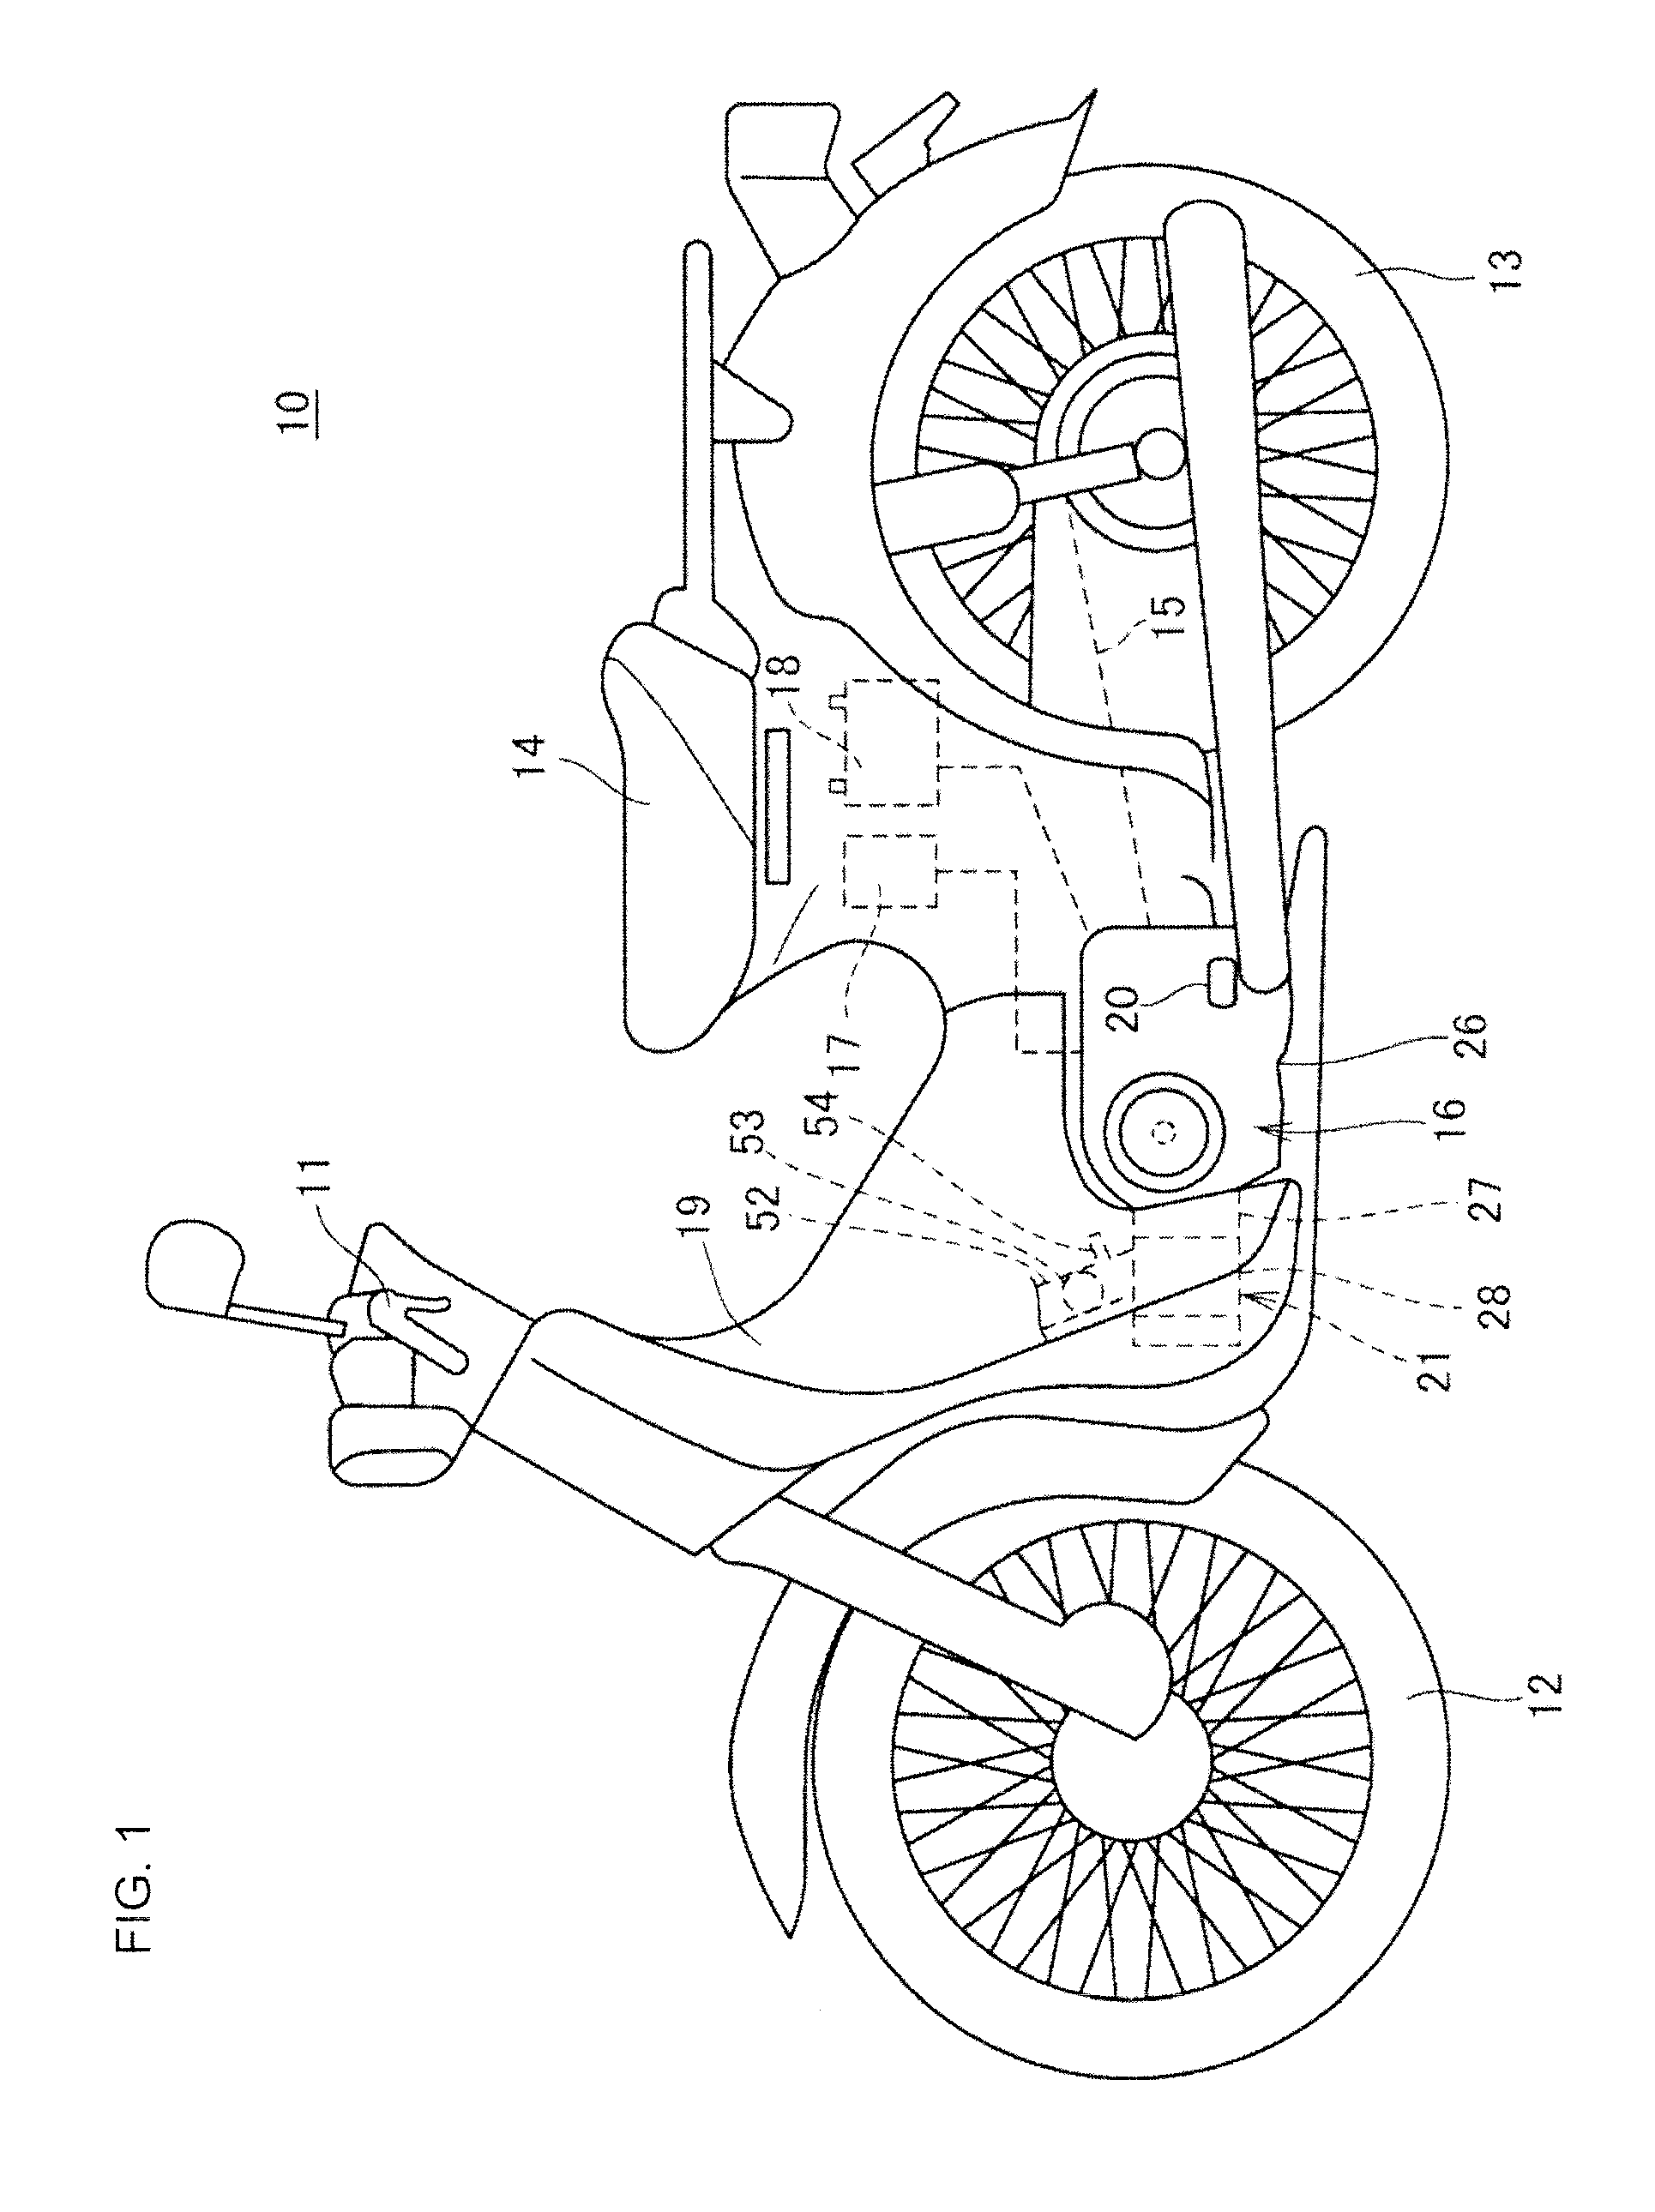 Speed change apparatus for vehicle